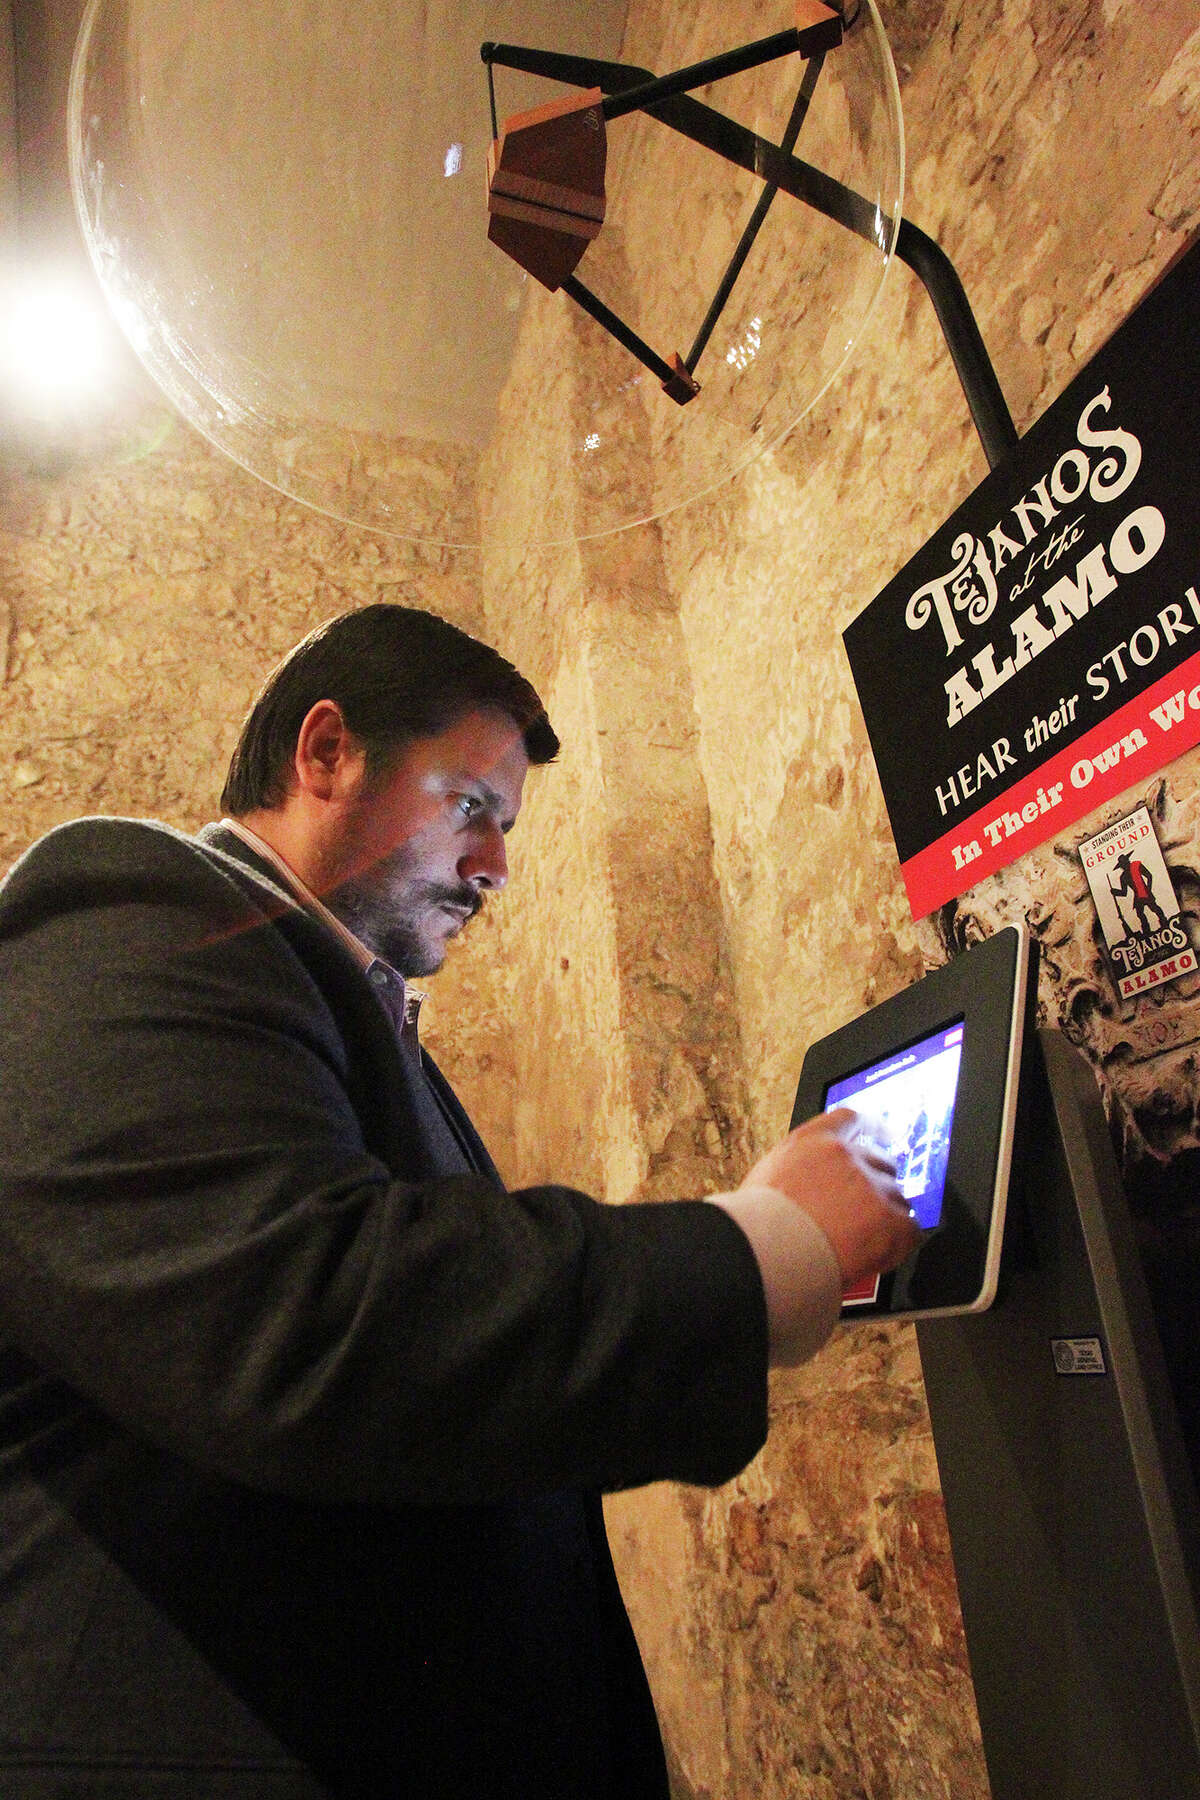 Dr. Jose Barragan demonstrates an audio information station where visitors will hear the story of Tejanos at the Alamo in a preview presentation of "Standing Their Ground: Tejanos at the Alamo" on February 20, 2014.